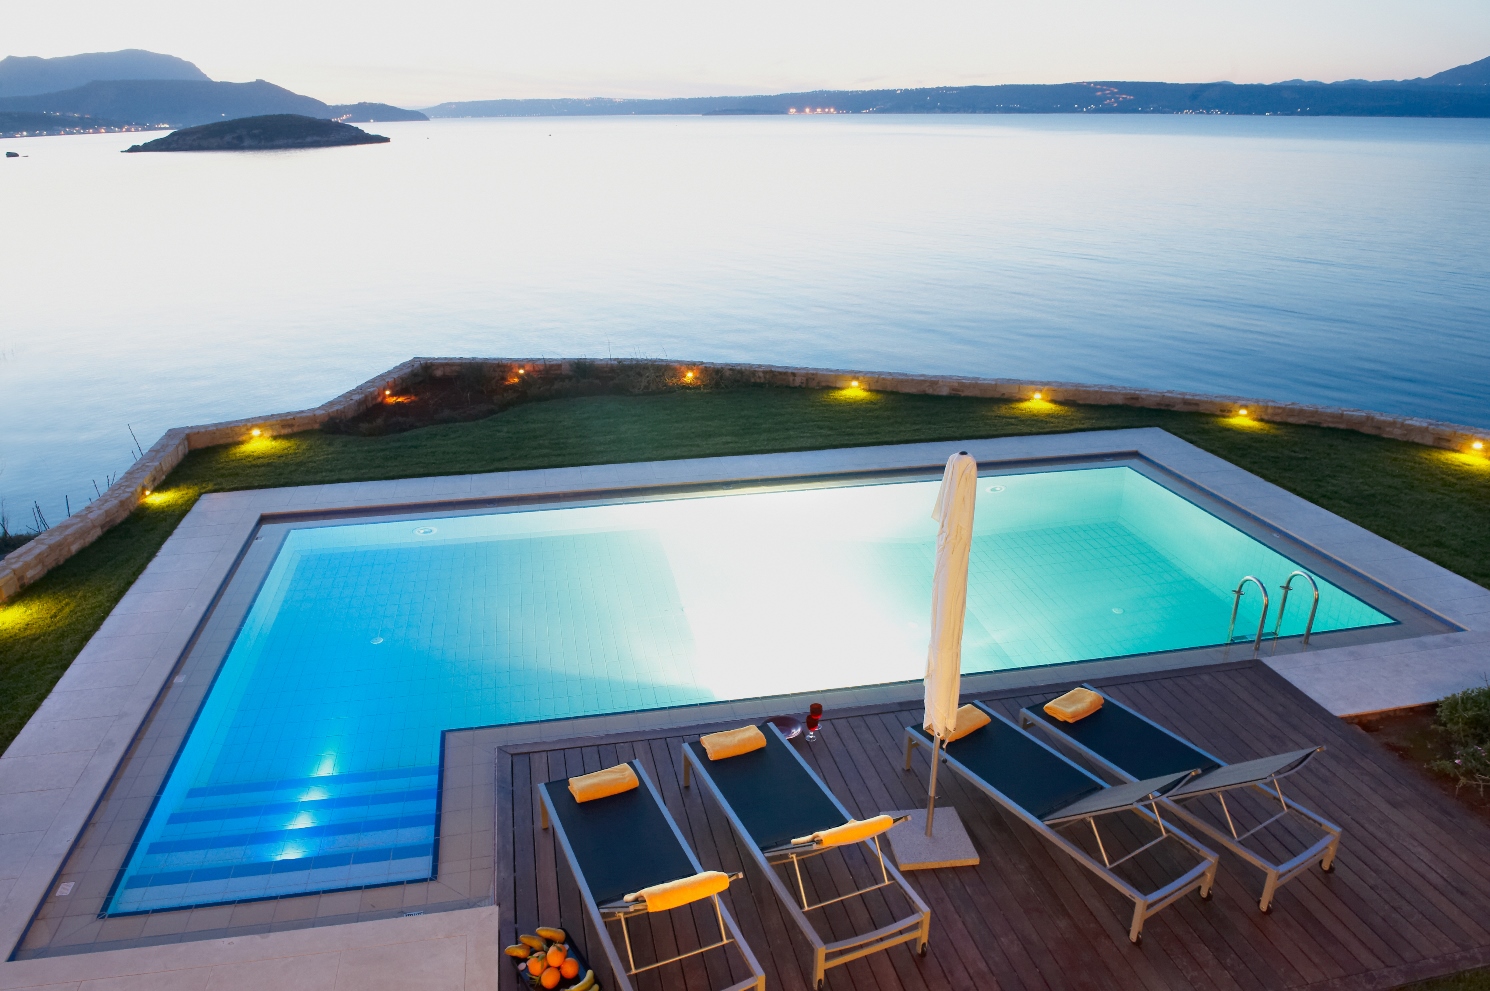 The pool and view at Almyra Residence